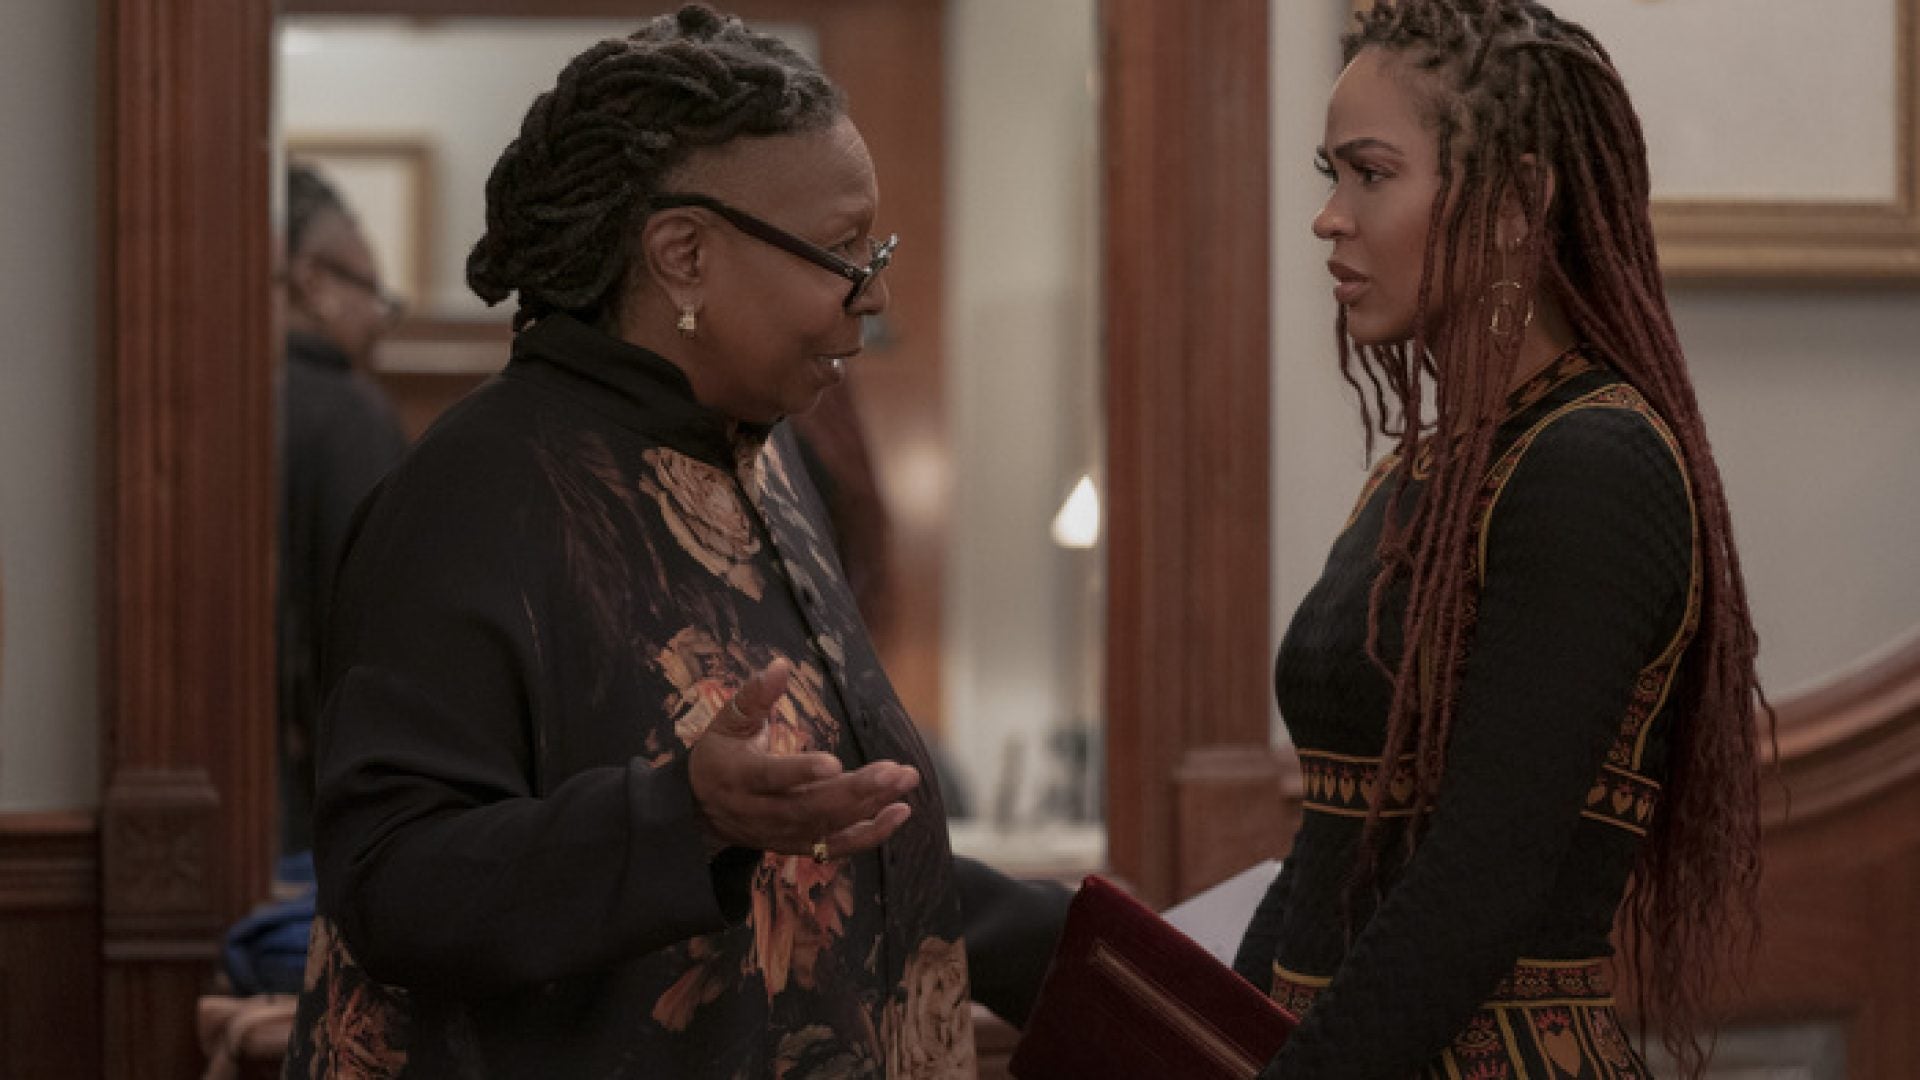 Meagan Good Says ‘Eye-Opening’ Conversations With Whoopi Goldberg Helped Her With Divorce